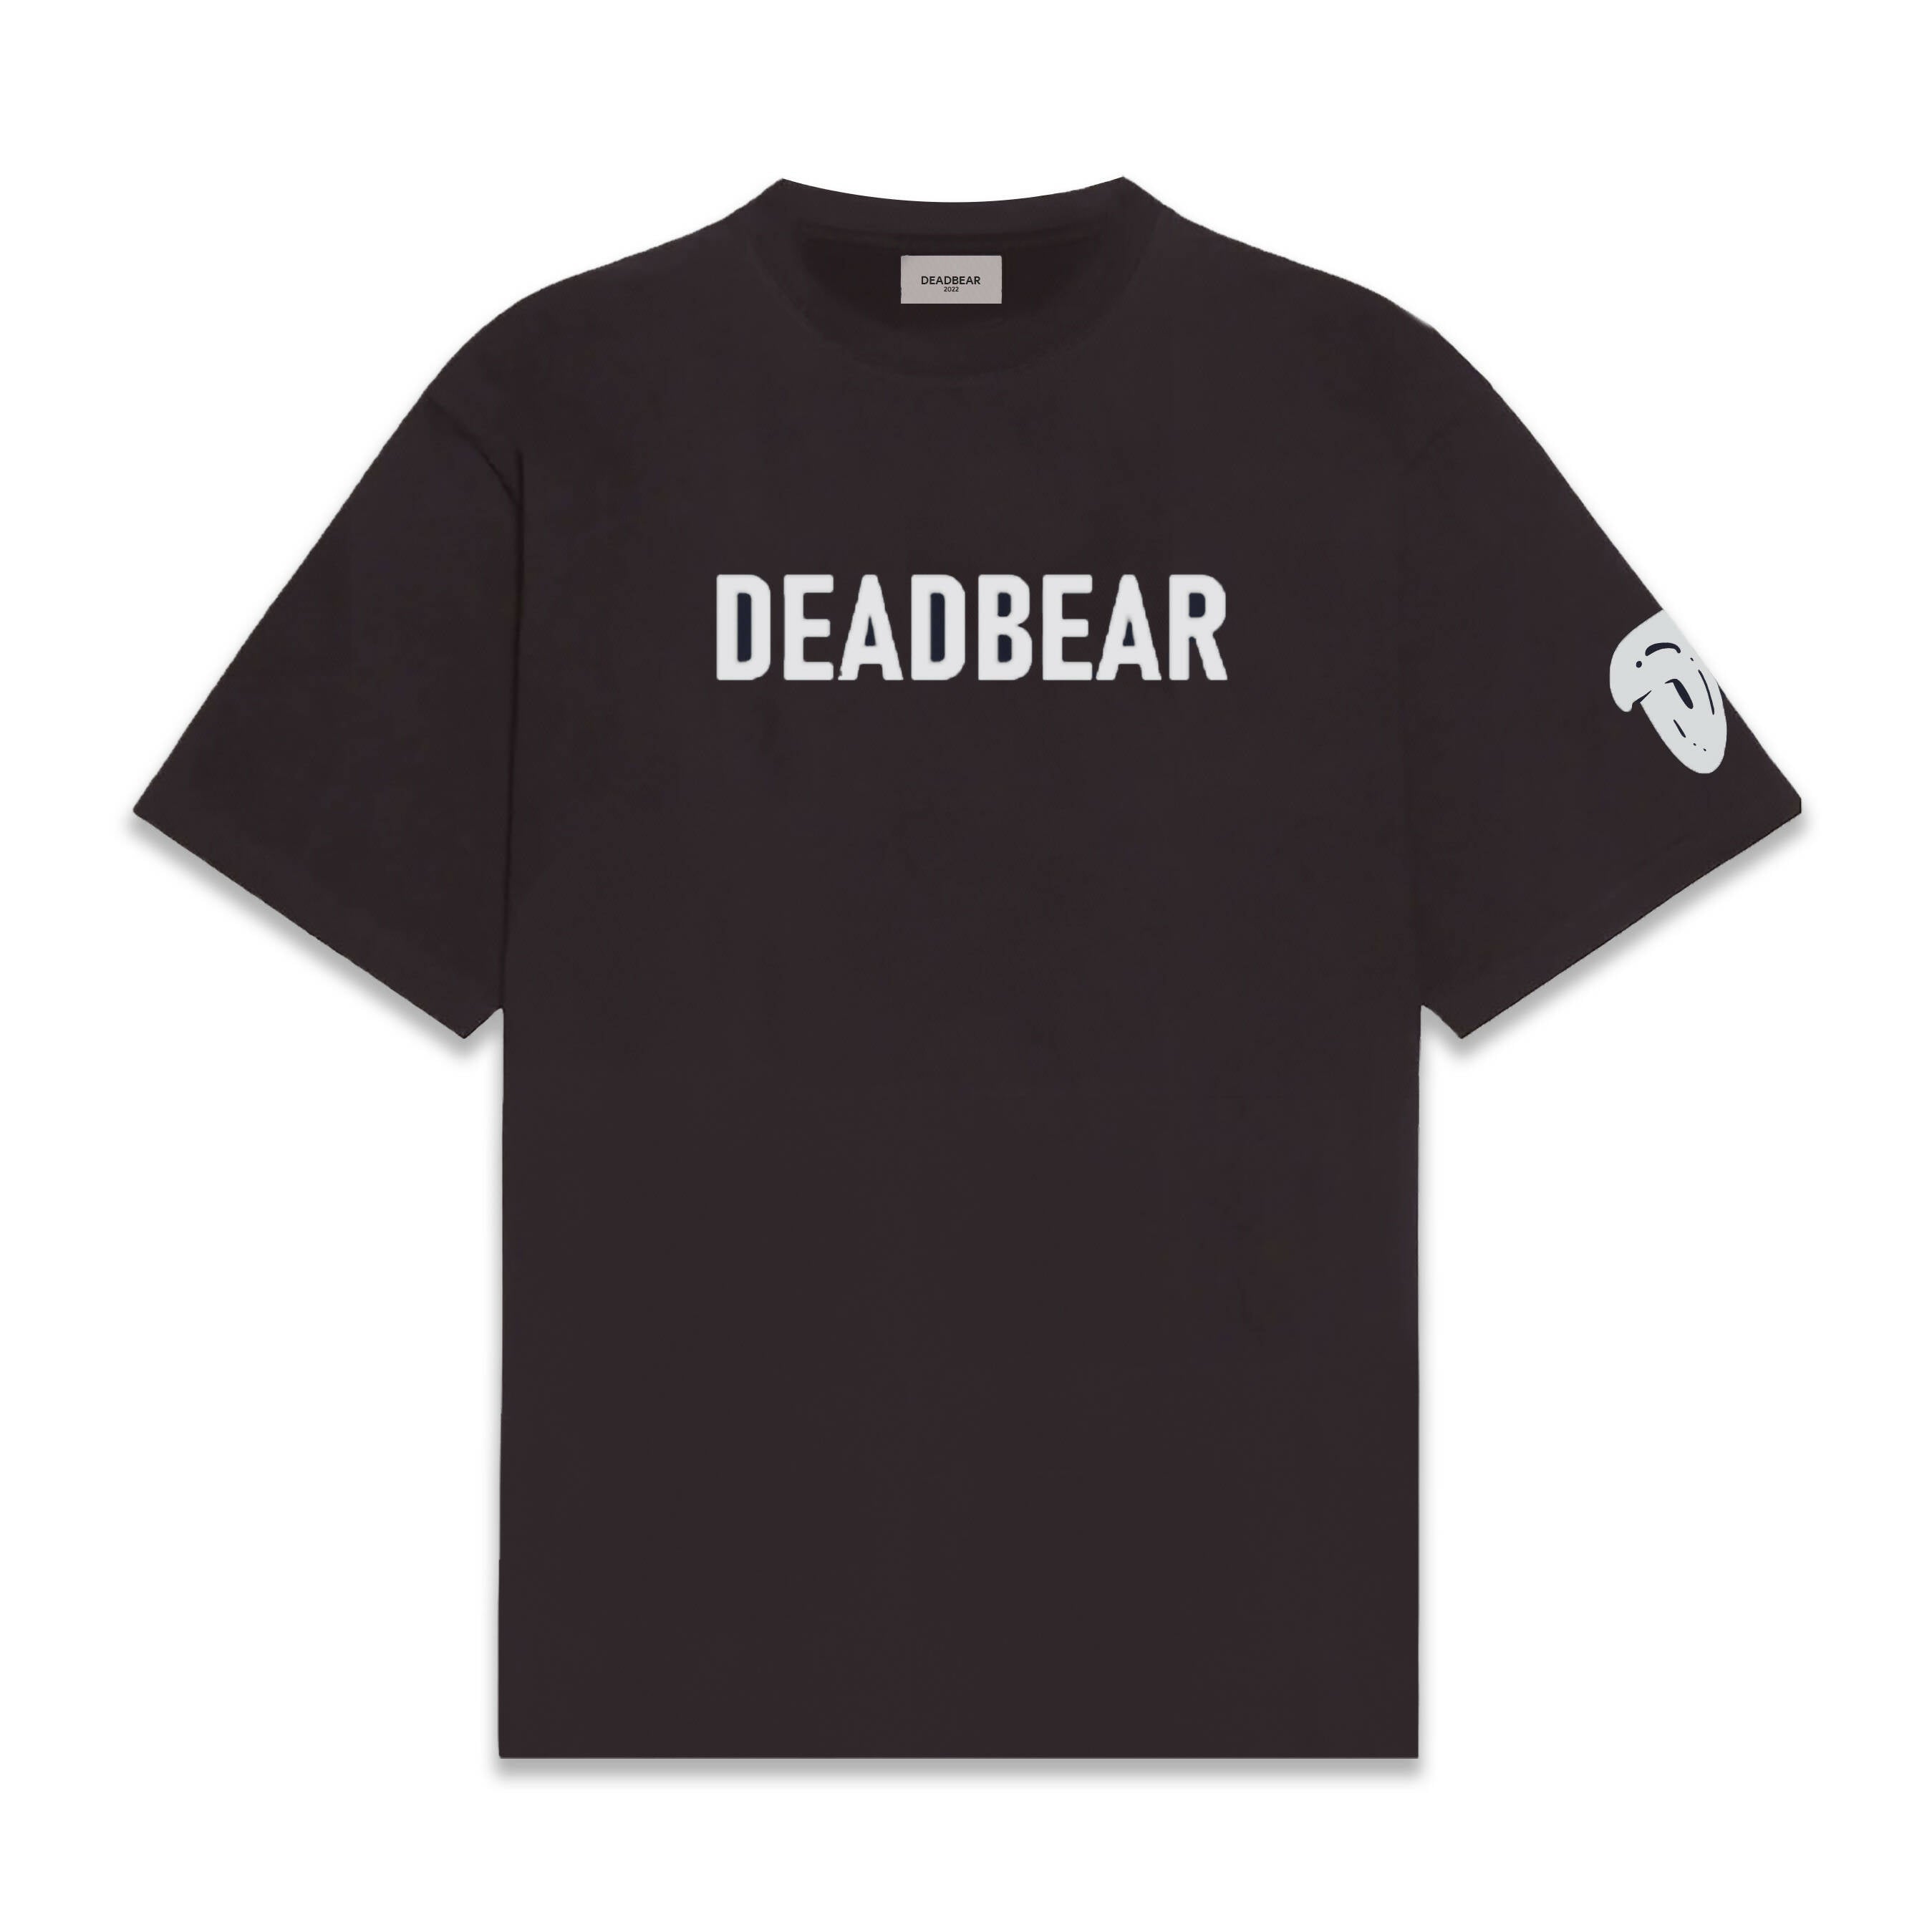 More Dead Than Alive Brown Tee